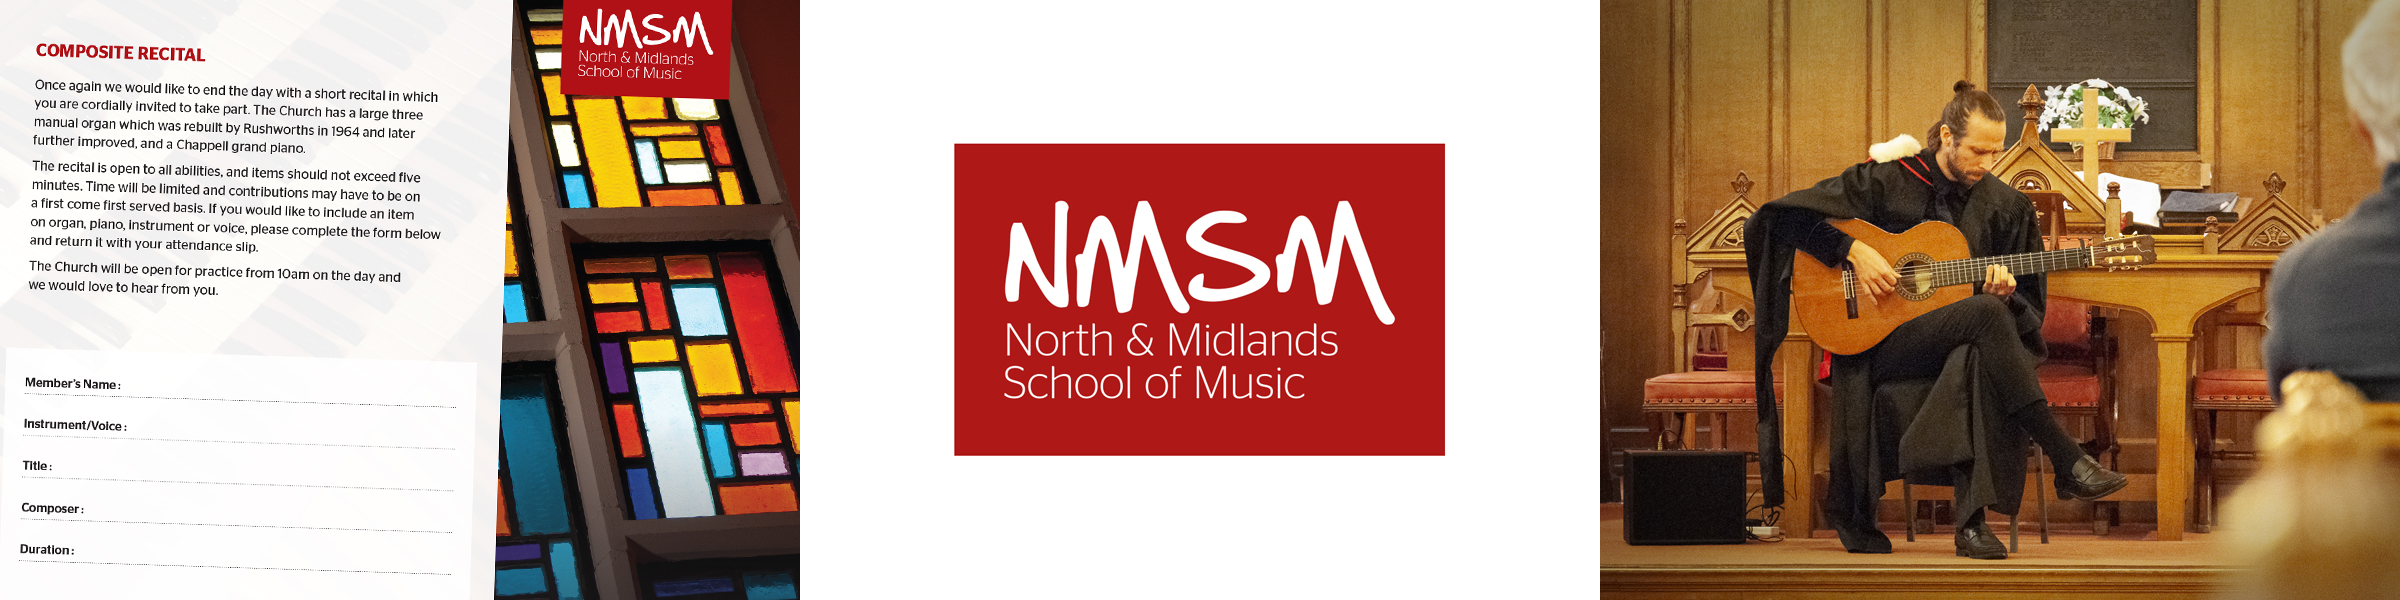 North and Midlands School of Music